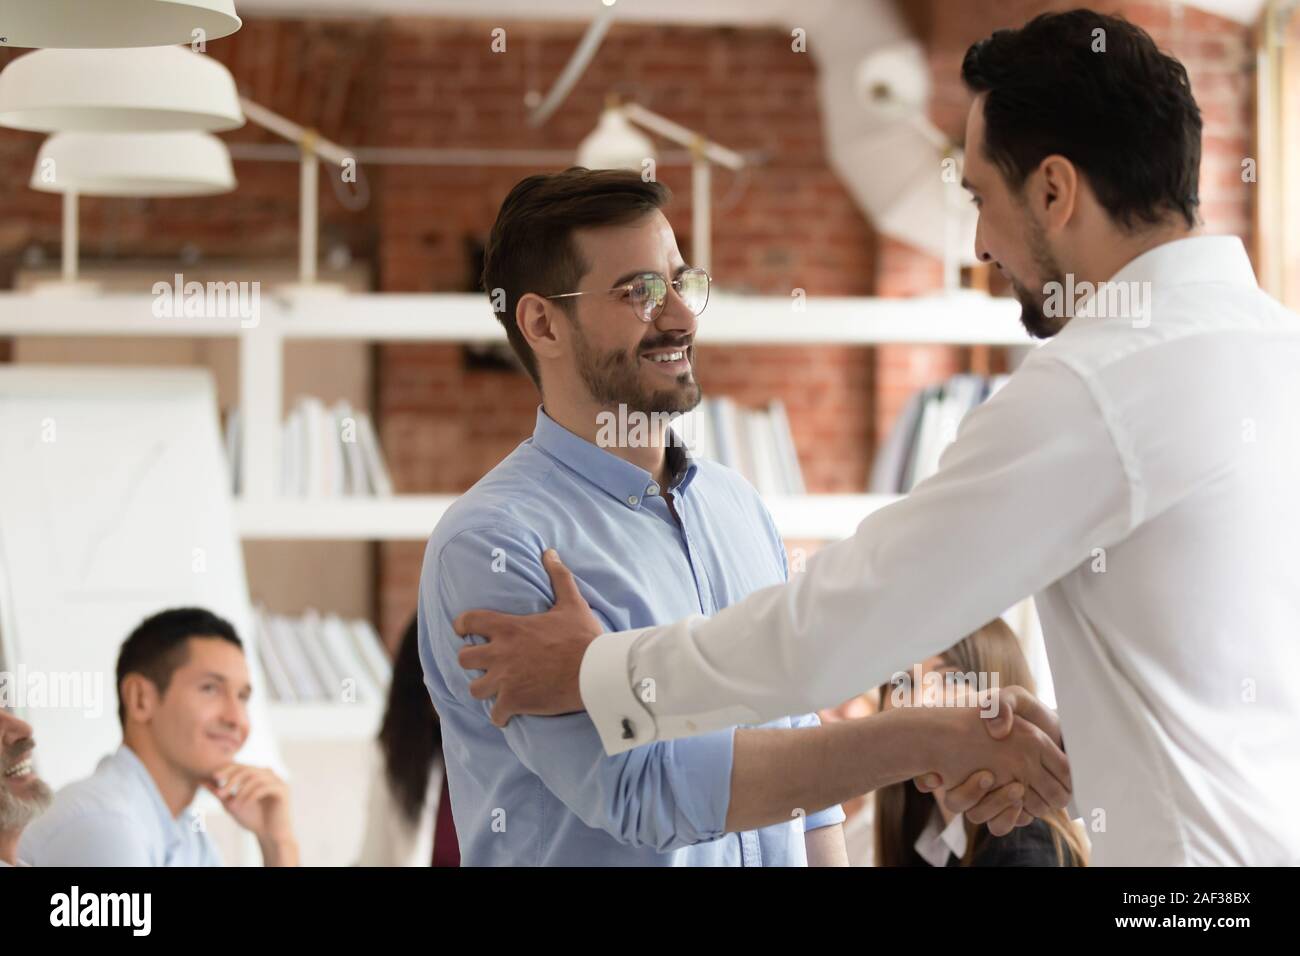 Middle east appearance boss praising employee express respect shaking hands Stock Photo